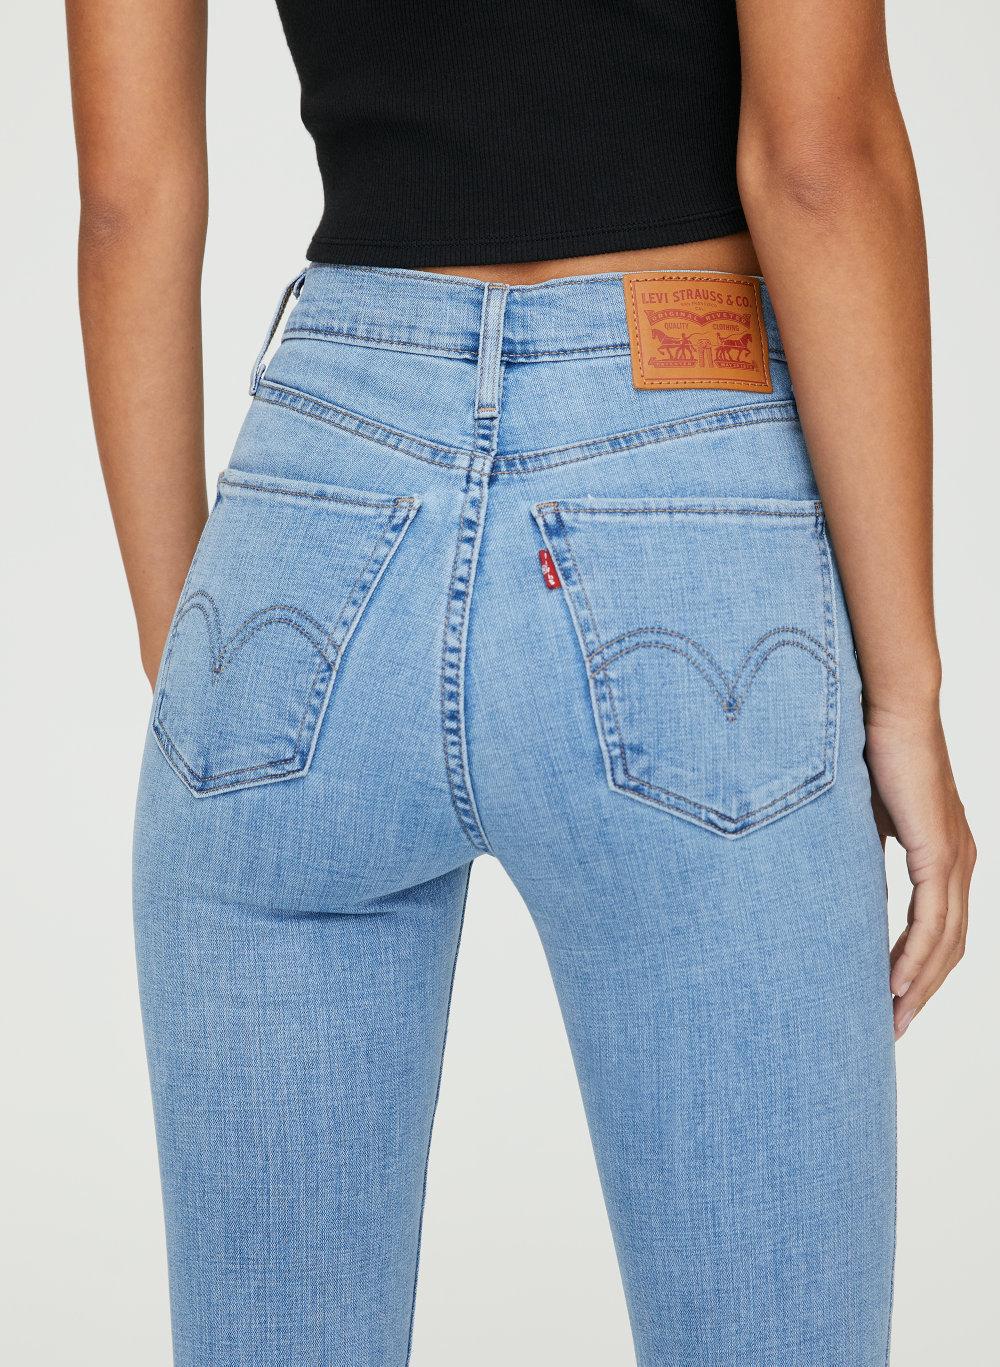 super high waisted jeans levis